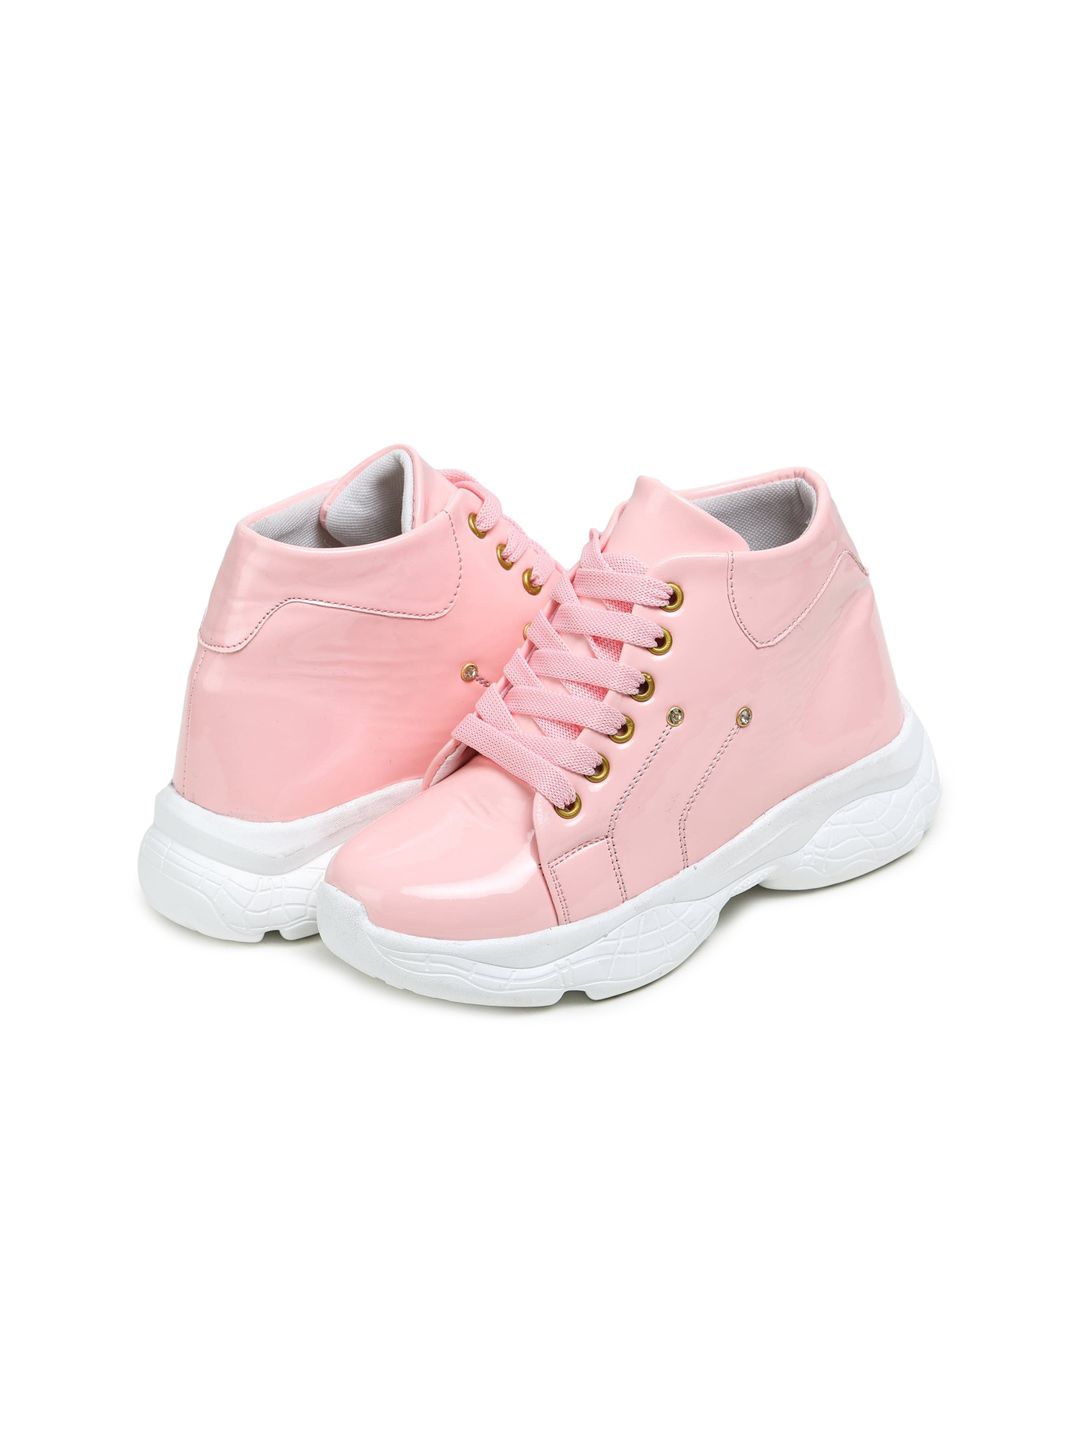 BOOTCO Women Pink Woven Design Sneakers Price in India